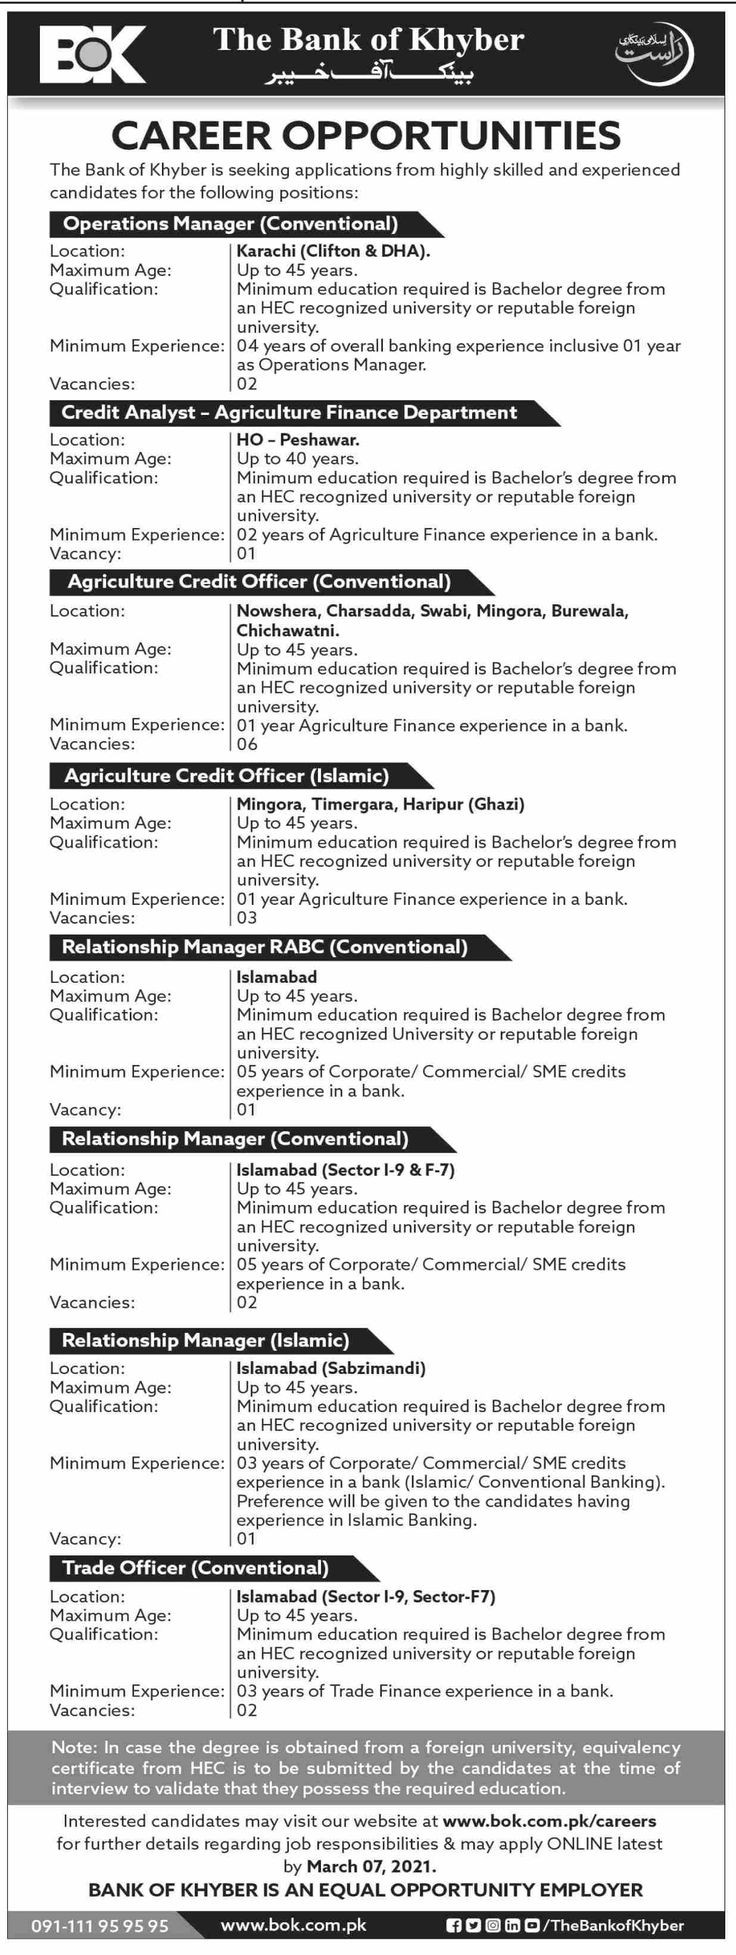 The Bank of Khyber BOK Karachi Jobs 2021 Latest For Operation Manager, Credit Analyst, Relationship Manager & more